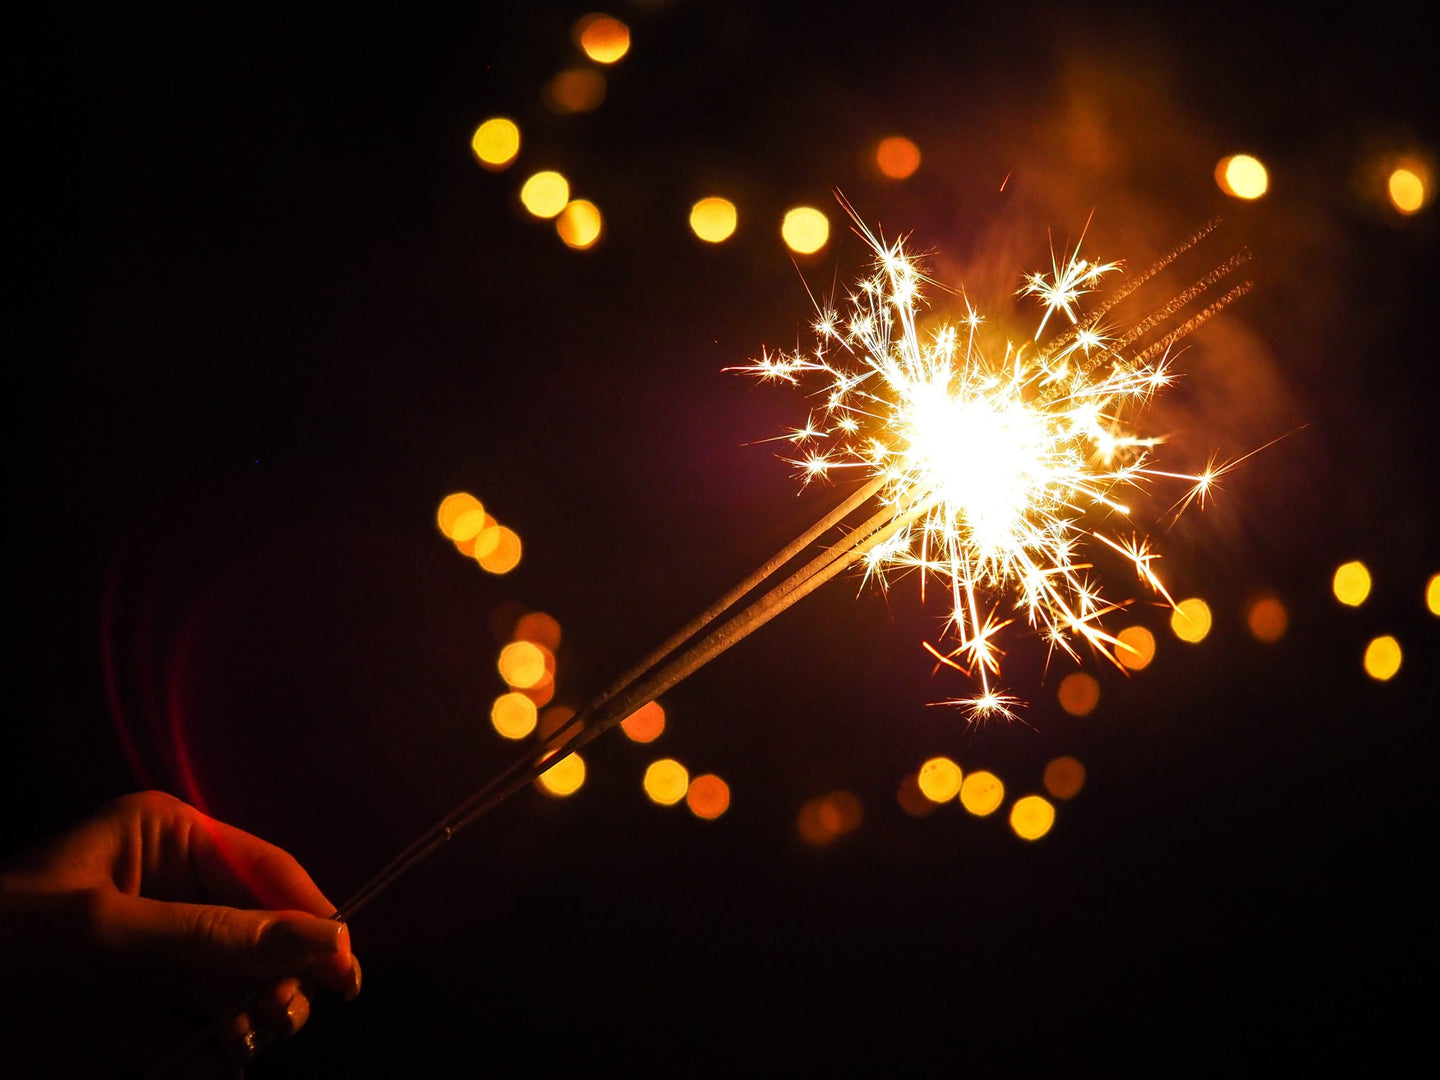 Photo by energepic.com: https://www.pexels.com/photo/person-holding-lighted-firecracker-288478/